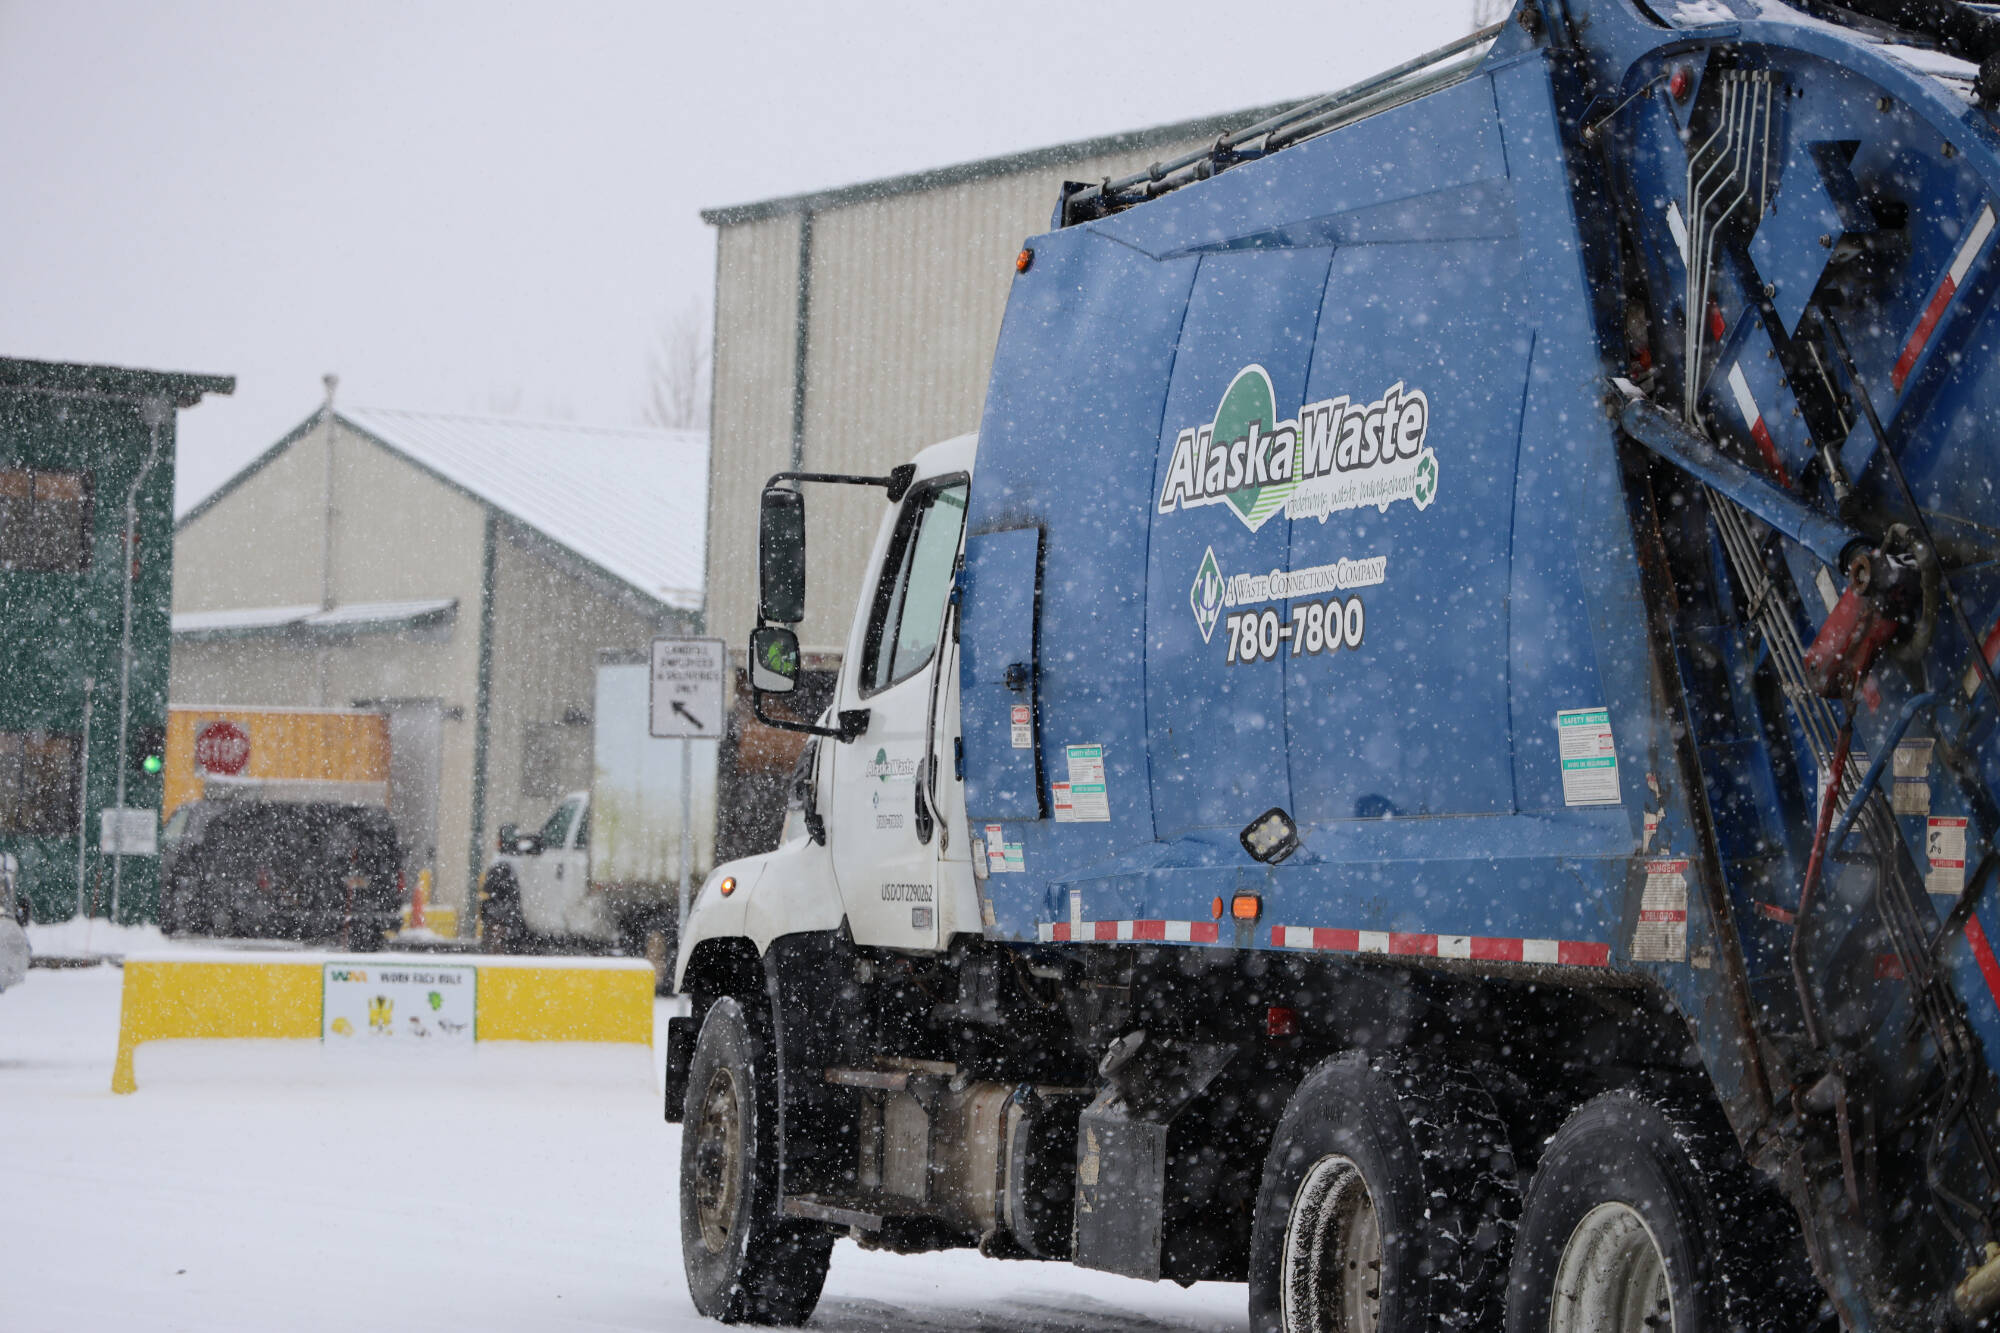 An Alaska Waste truck enters Waste Management’s Capitol Disposal Landfill in Lemon Creek Monday morning. Starting Wednesday, residential prices will increase nearly three time the current amount and residential dumping hours will reduce also beginning Saturday. (Clarise Larson / Juneau Empire)